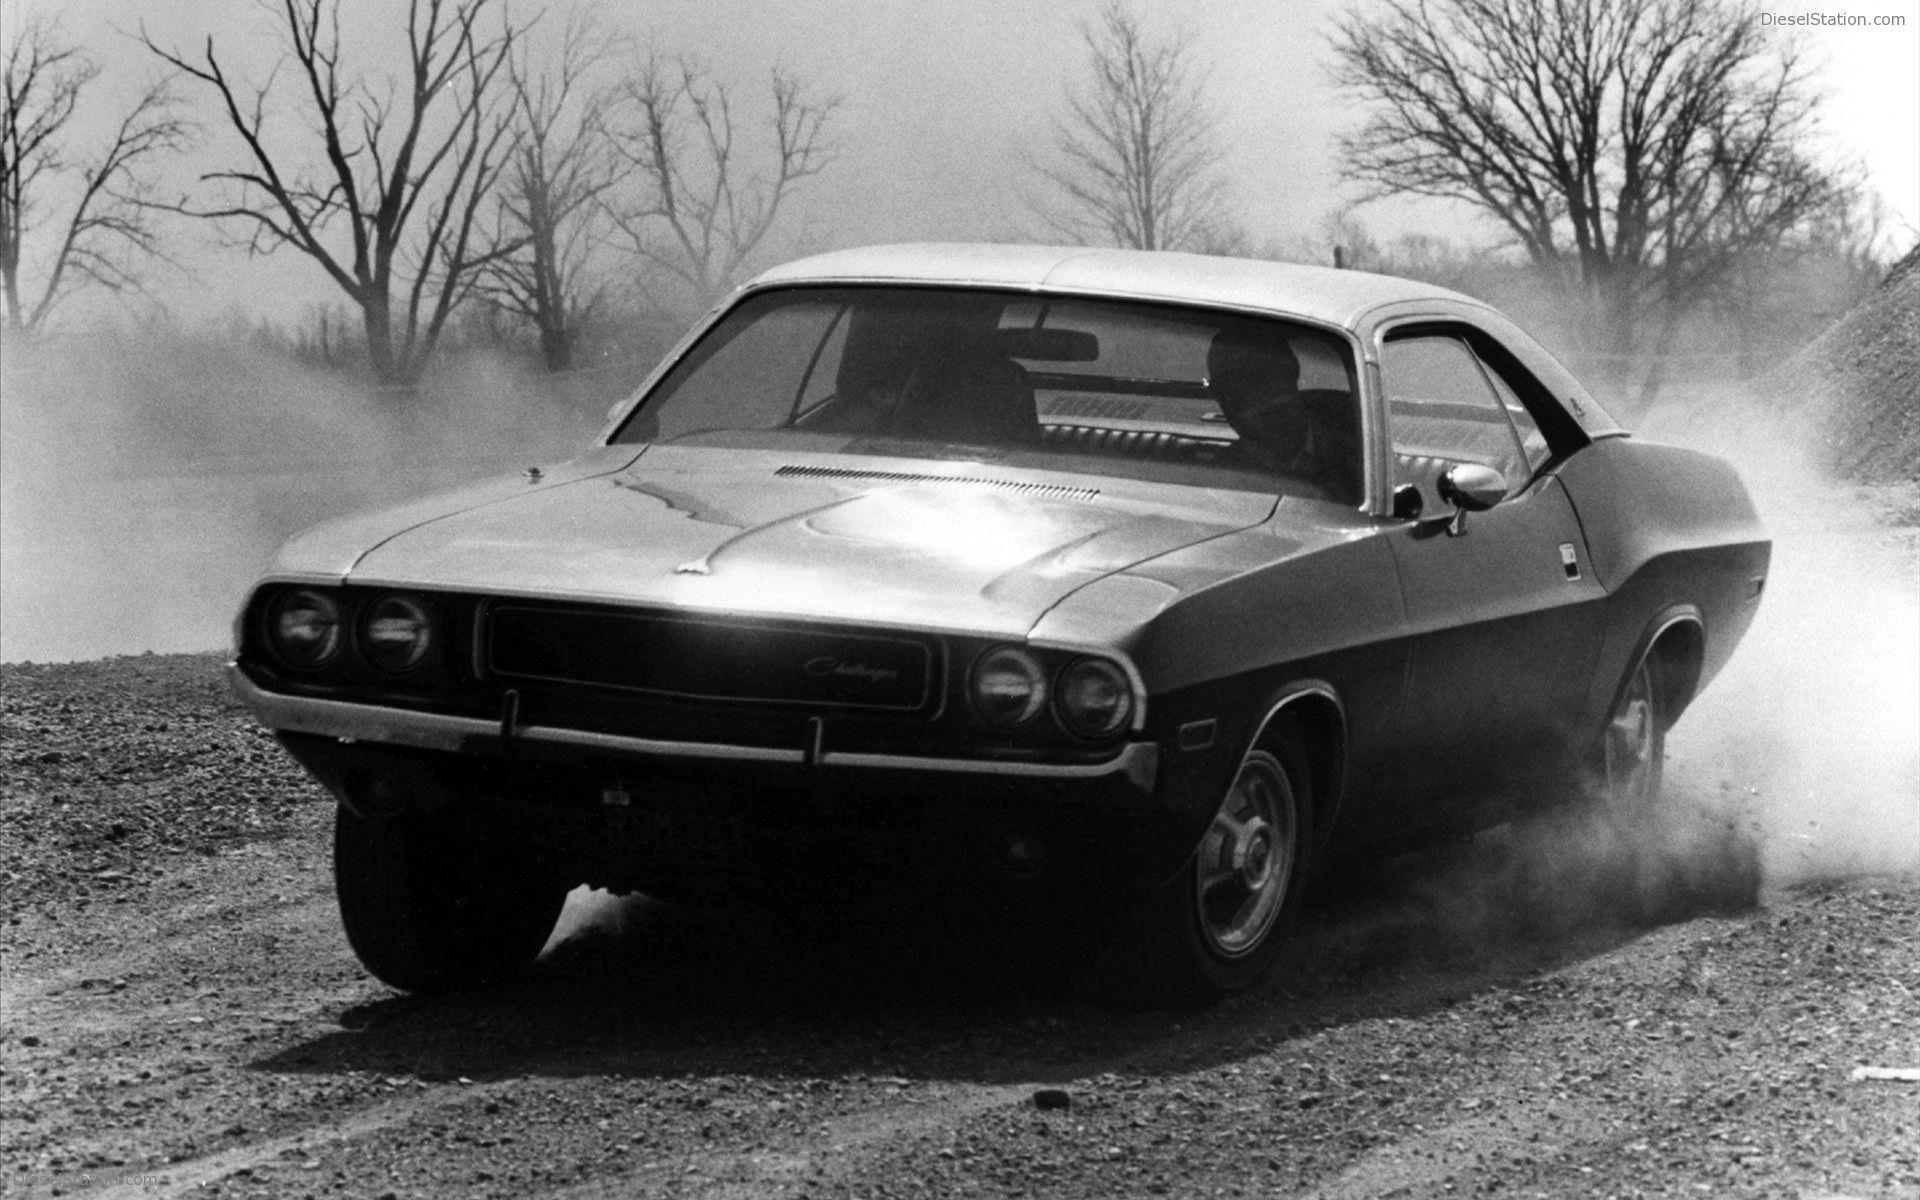 Classic Challenger Wallpaper Free Classic Challenger Background